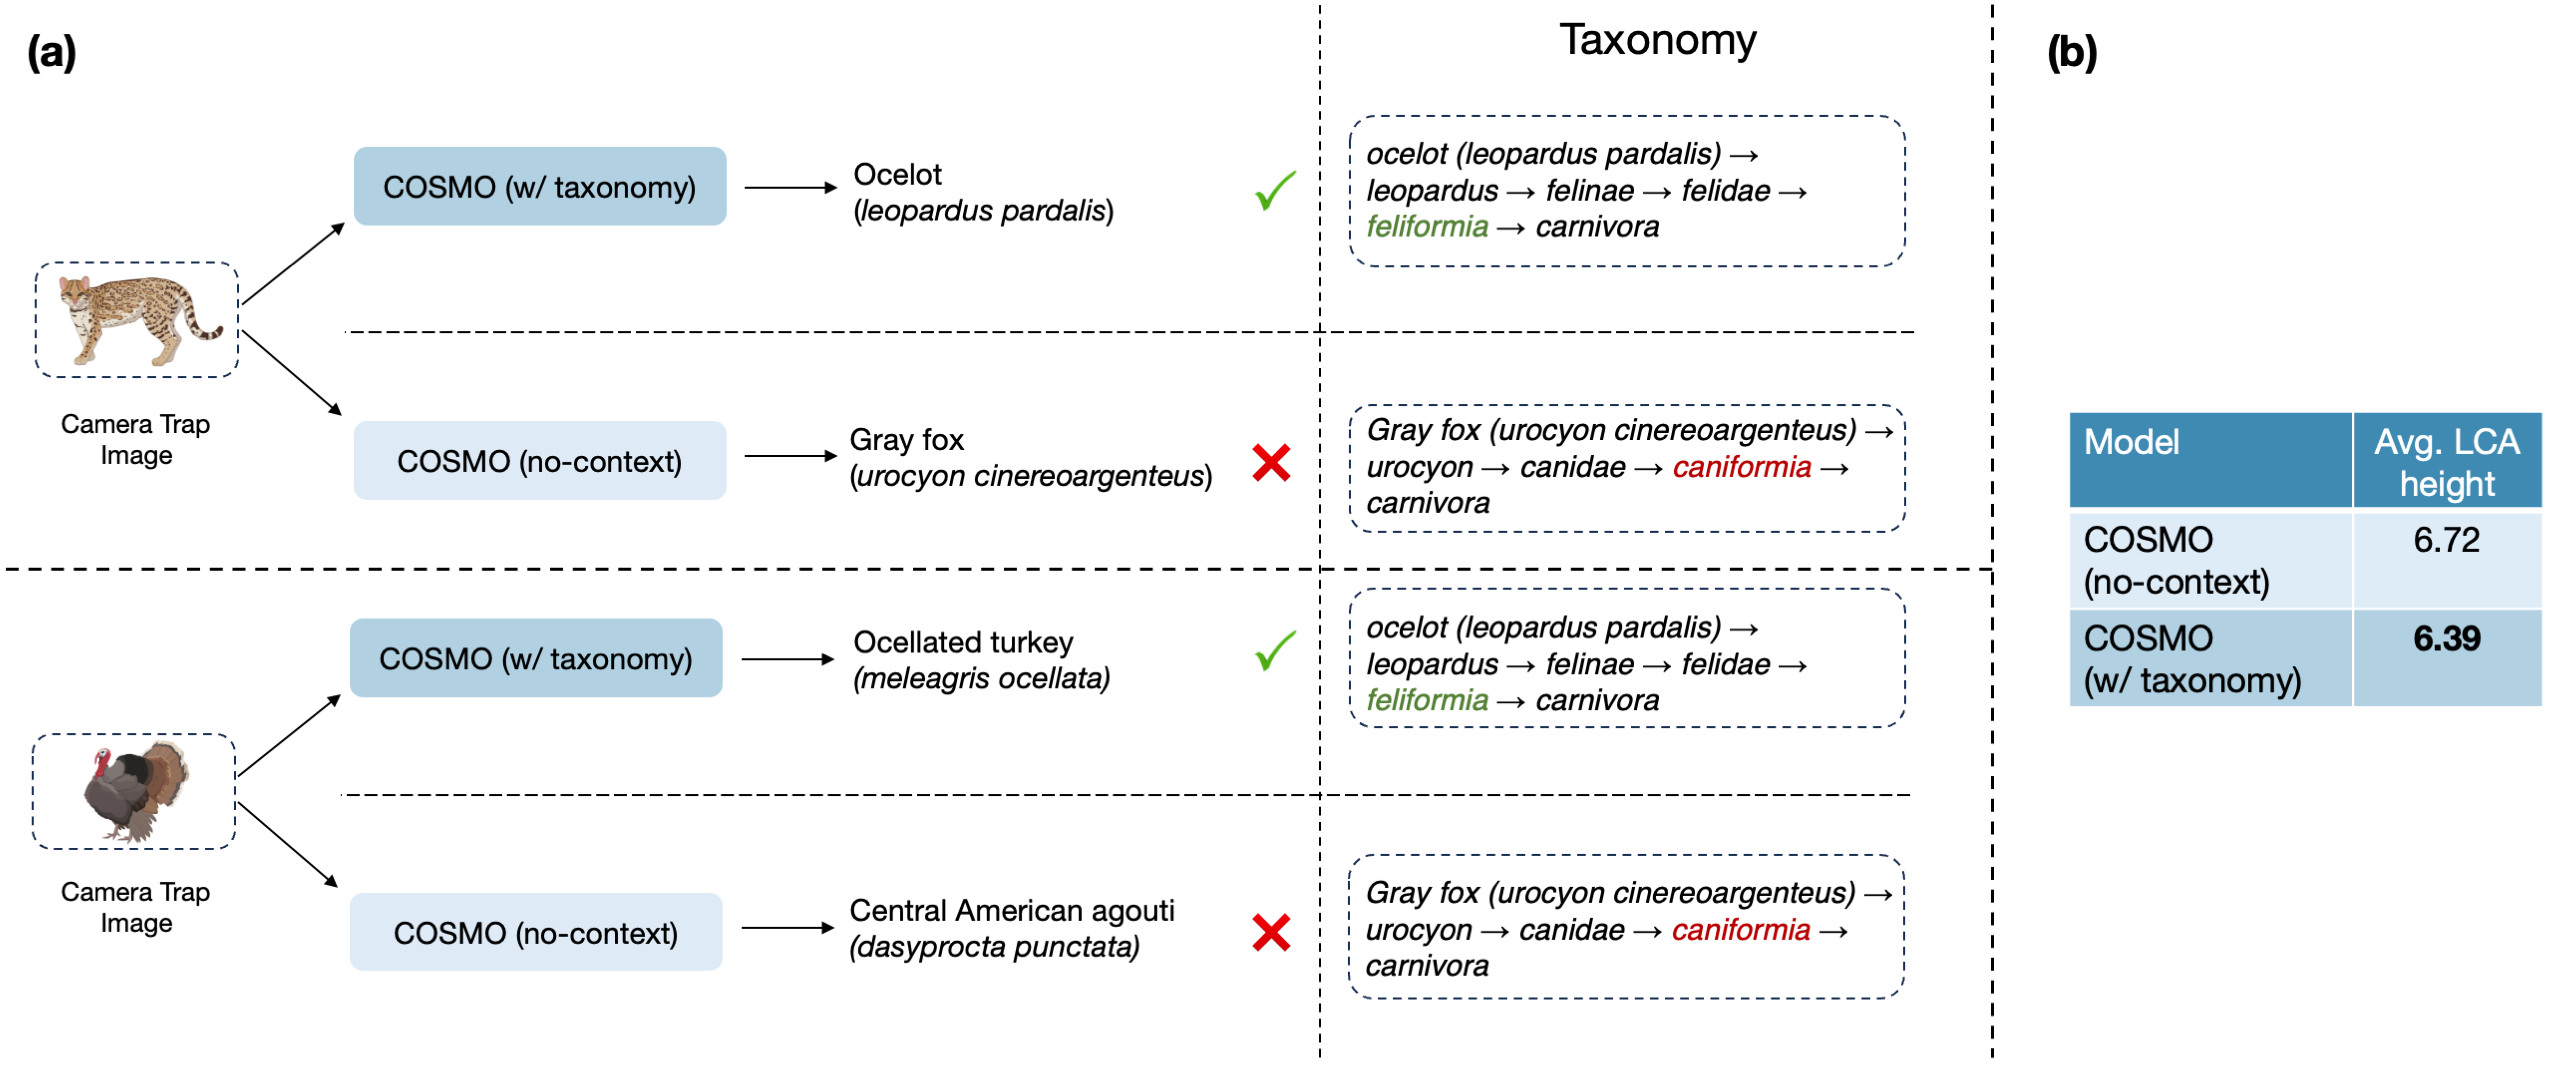 Taxonomy-aware model results in more plausible predictions